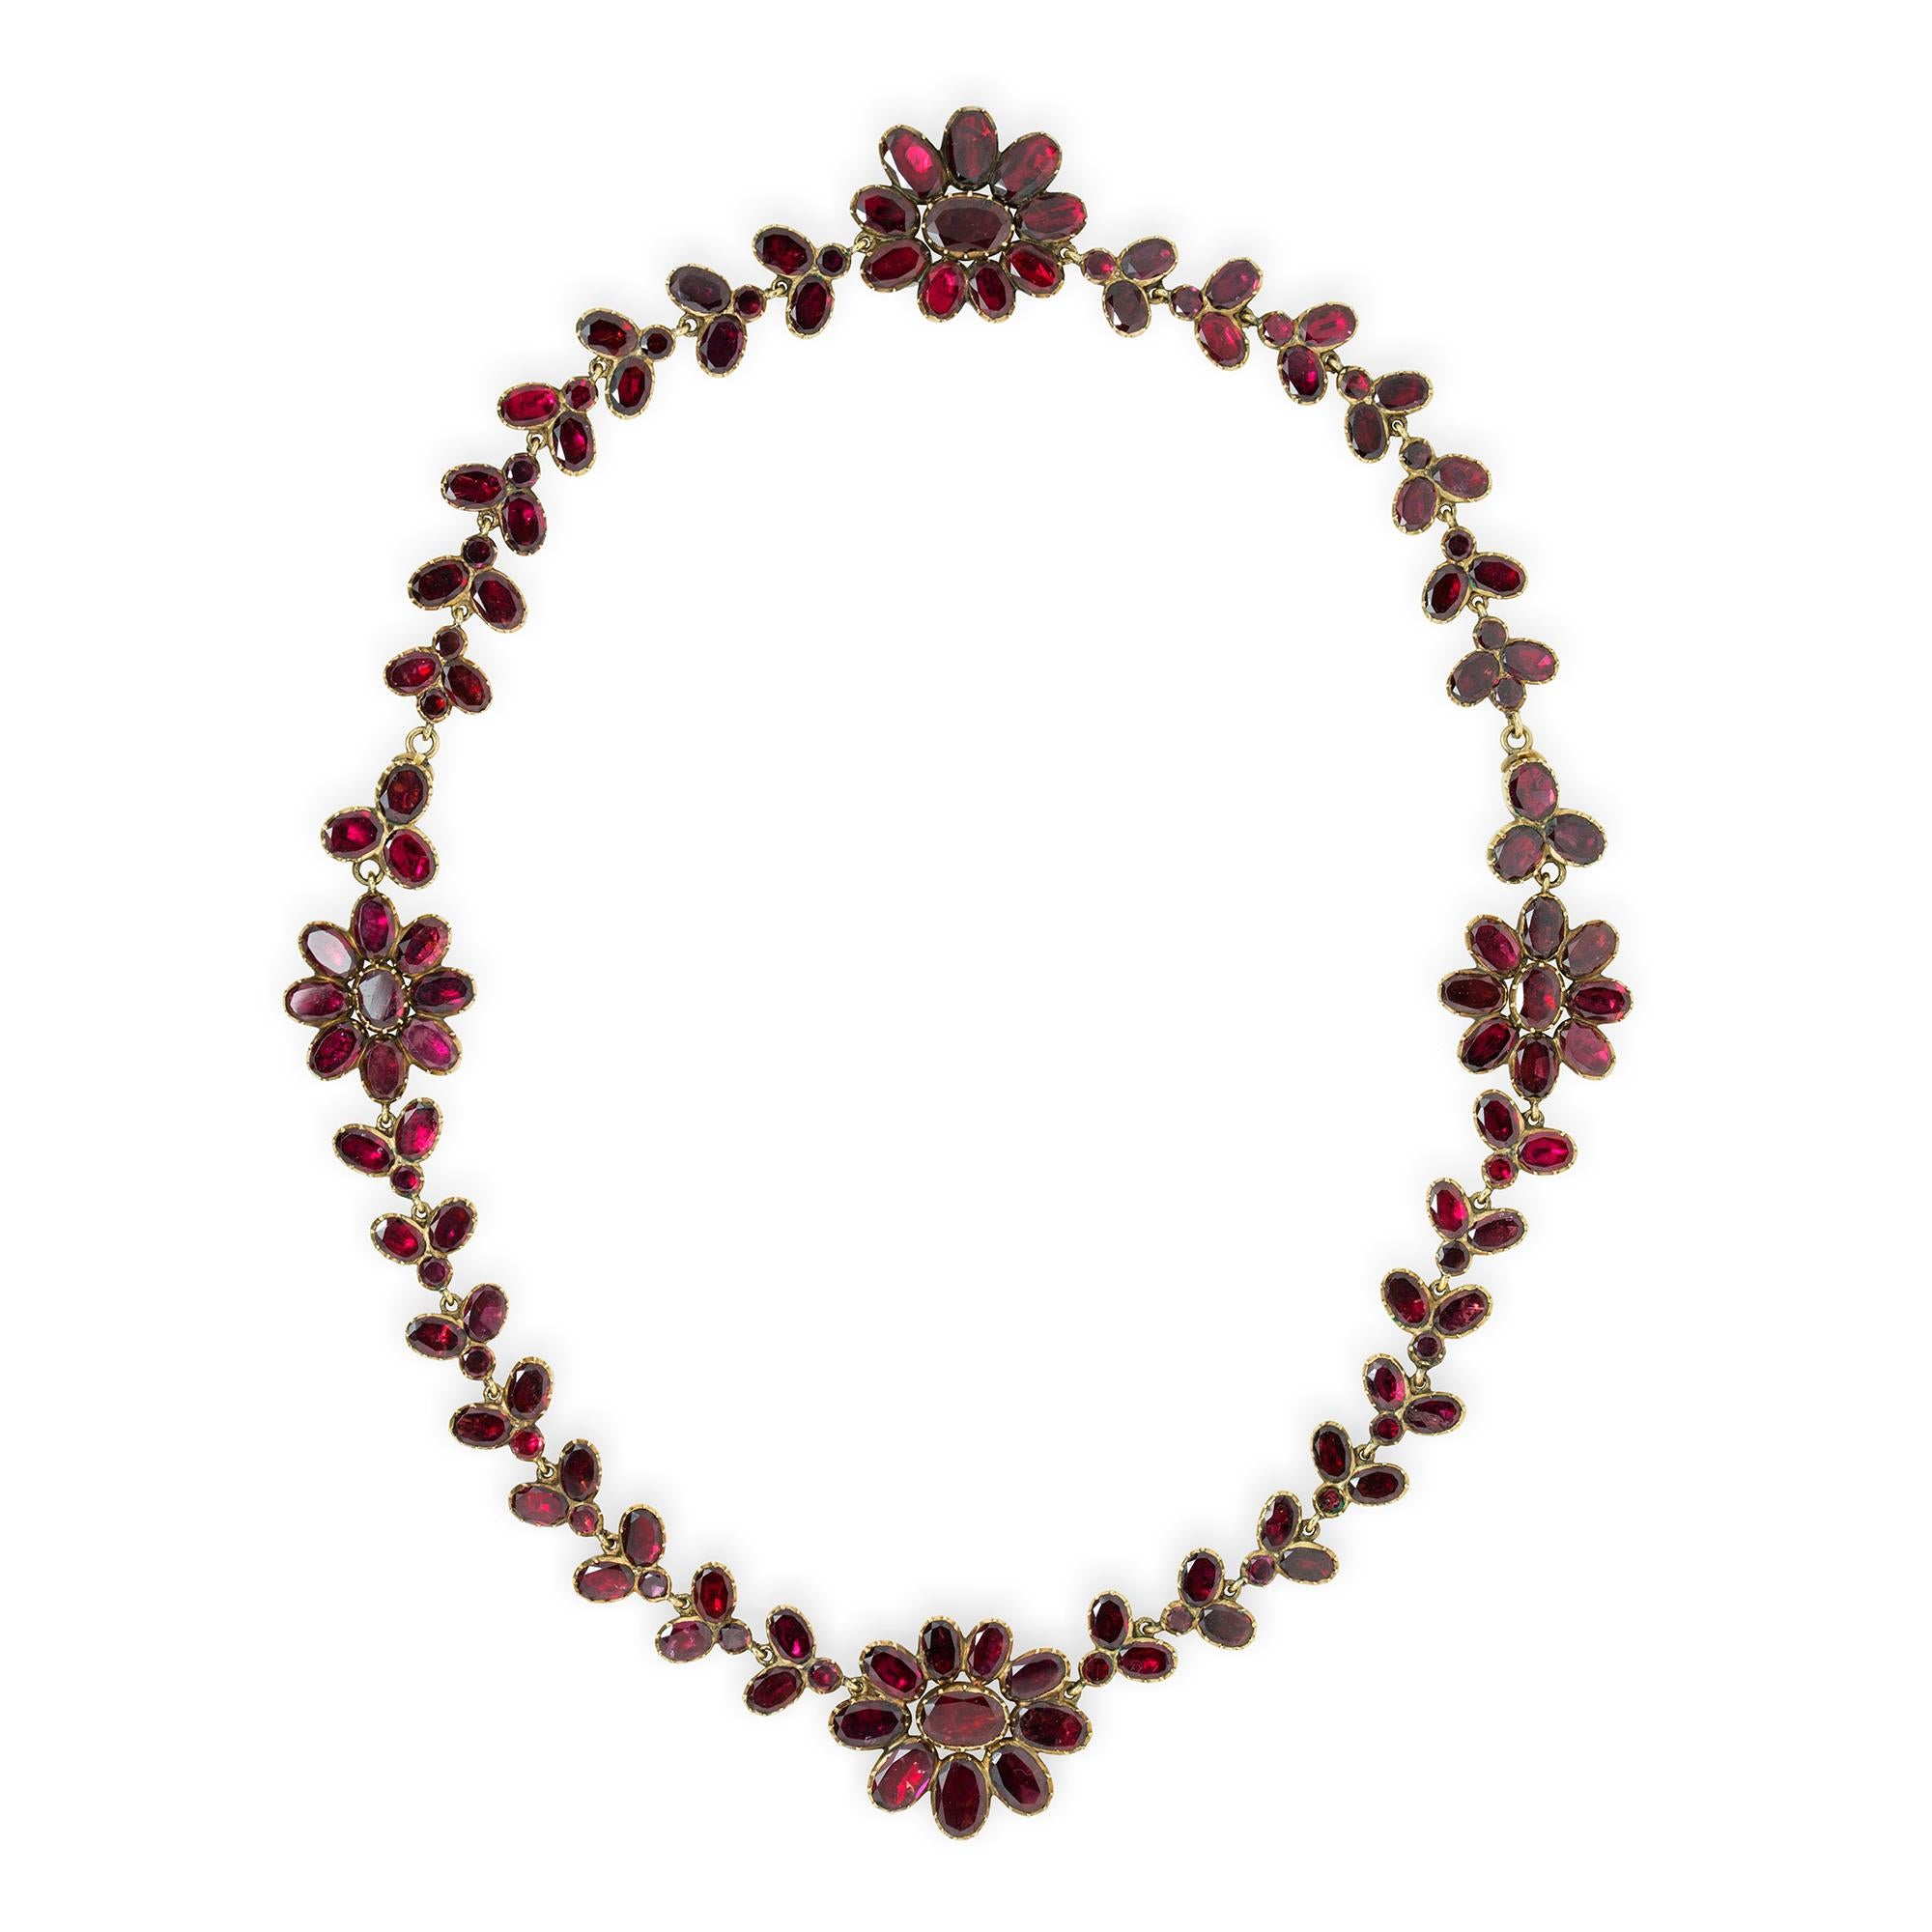 A George III garnet-set demi-parure, the necklace consisting of four garnet-set foliate clusters linked with articulated garnet-set trefoil-links, 17.5 inches long, the bracelet consisting of seventeen articulated garnet-set trefoil-links 7 inches